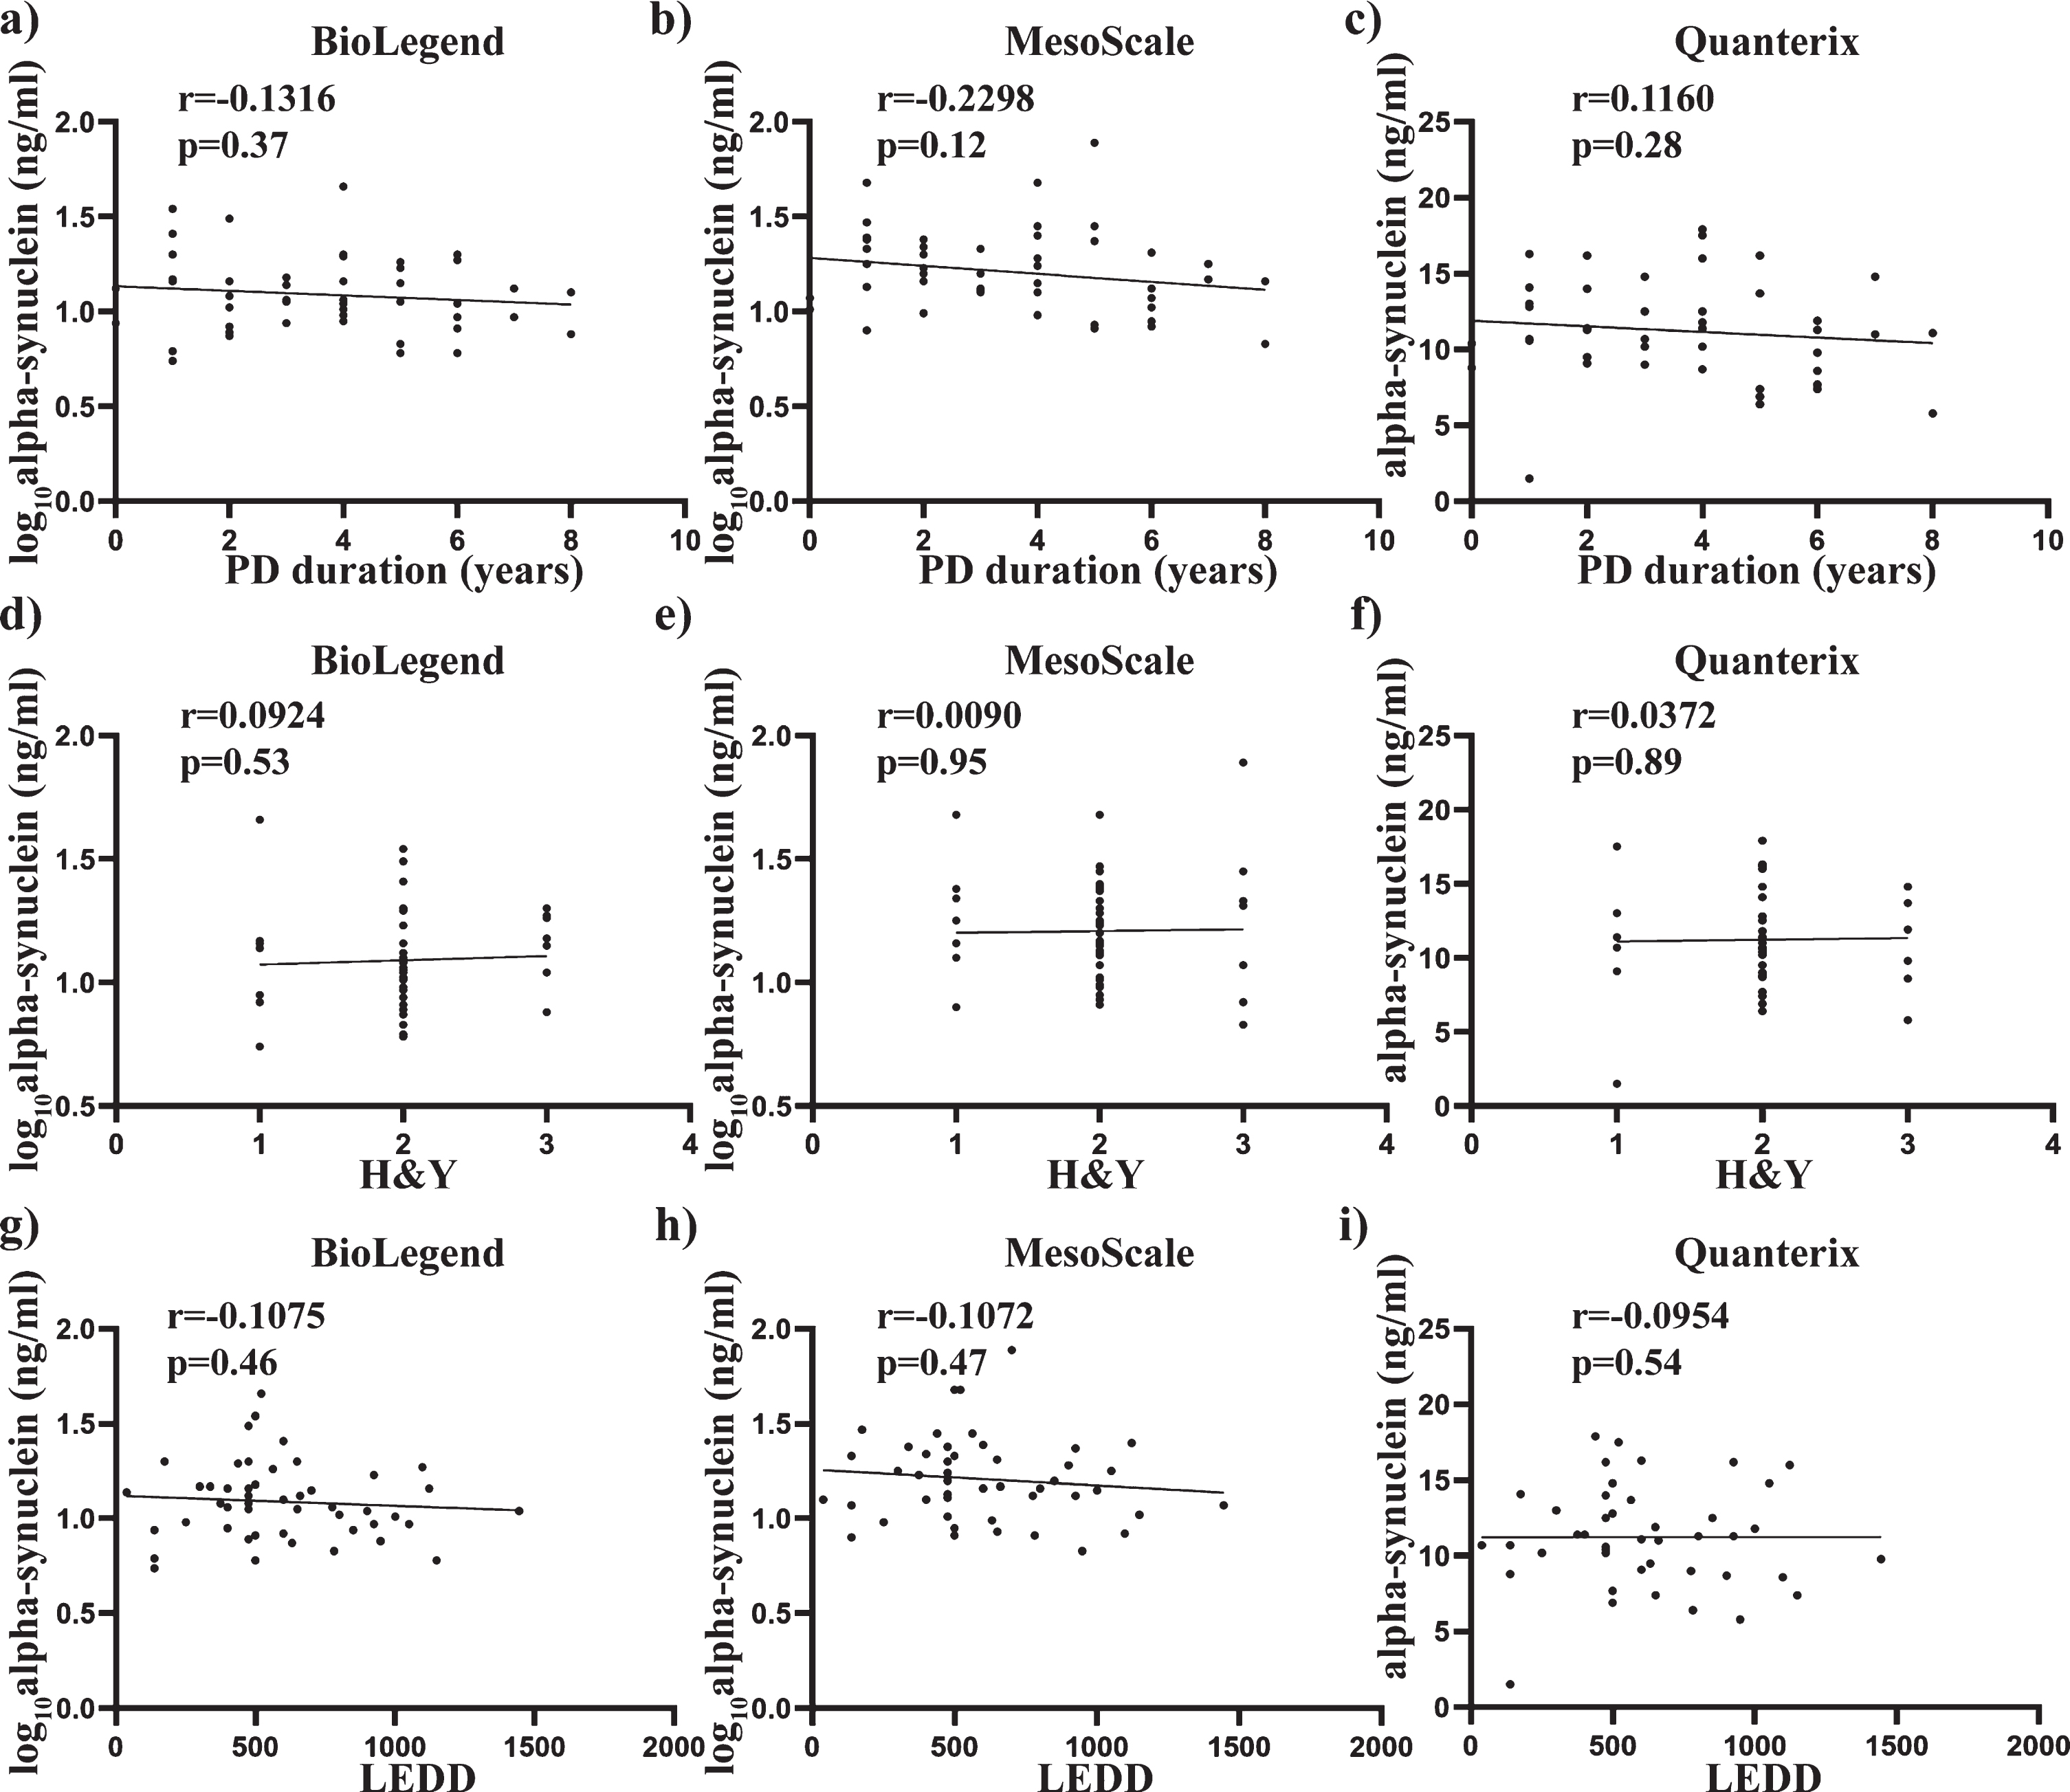 Relationship between total alpha-synuclein concentrations and clinical measures, disease duration and H&Y scores. Scatter plots show correlations between total alpha-synuclein (pg/mL), disease duration (years) and H&Y scores. Spearman analysis was used to assess significance at the 0.05 level. No significant correlations were found between disease duration and total alpha-synuclein measured using BioLegend (a), MesoScale (b) and Quanterix (c) assays. No significant correlations were also found between H&Y scale and total alpha-synuclein measured using BioLegend (d), MesoScale (e) and Quanterix (f) assays. No significant correlations were further found between LEDD and total alpha-synuclein measured using BioLegend (g), MesoScale (h) and Quanterix (i) assays.